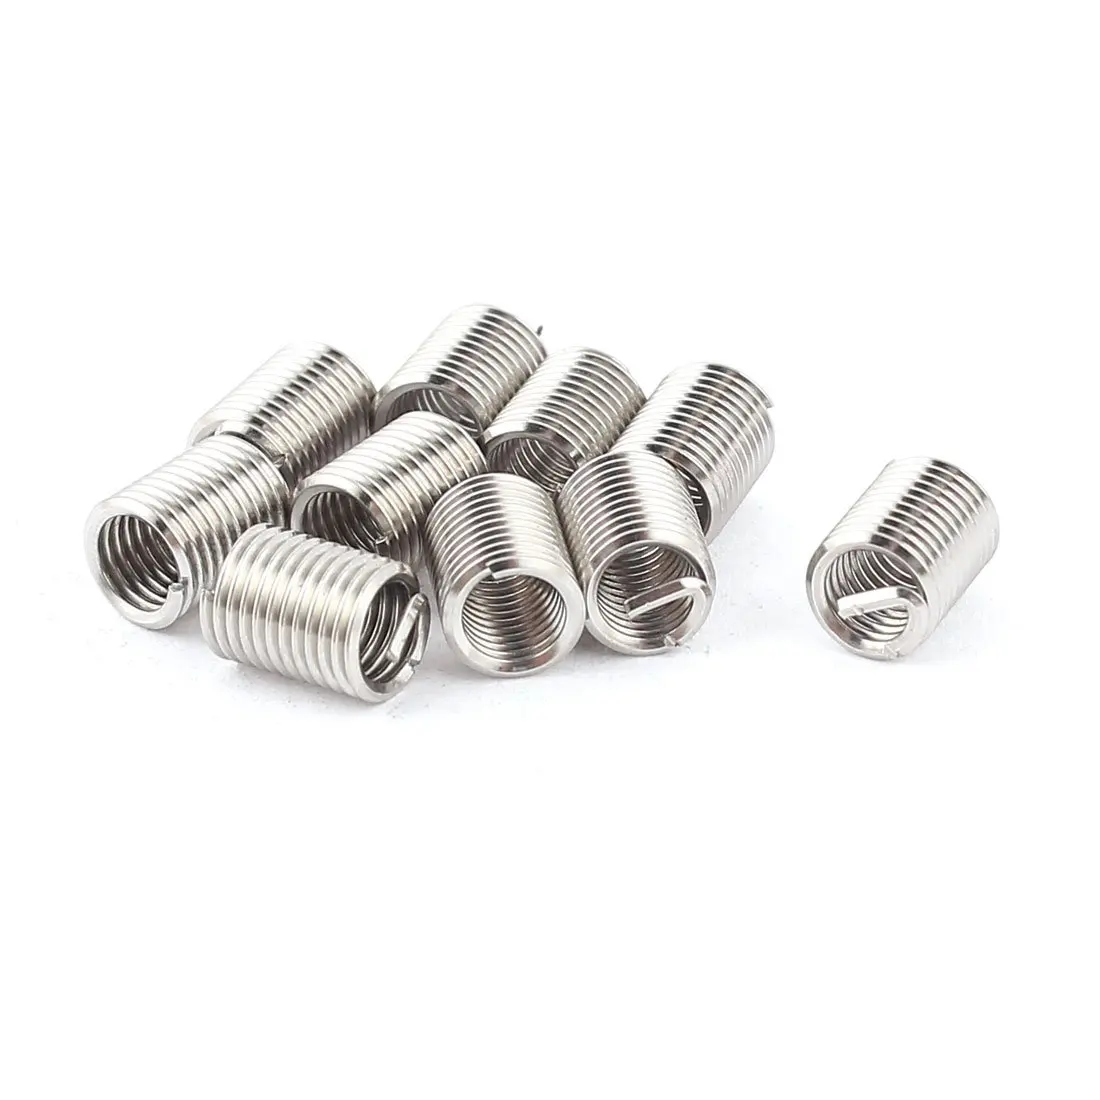 10 Off V-Coil Thread Repair Inserts M12 x 1.75 Compatible With Helicoil 3D